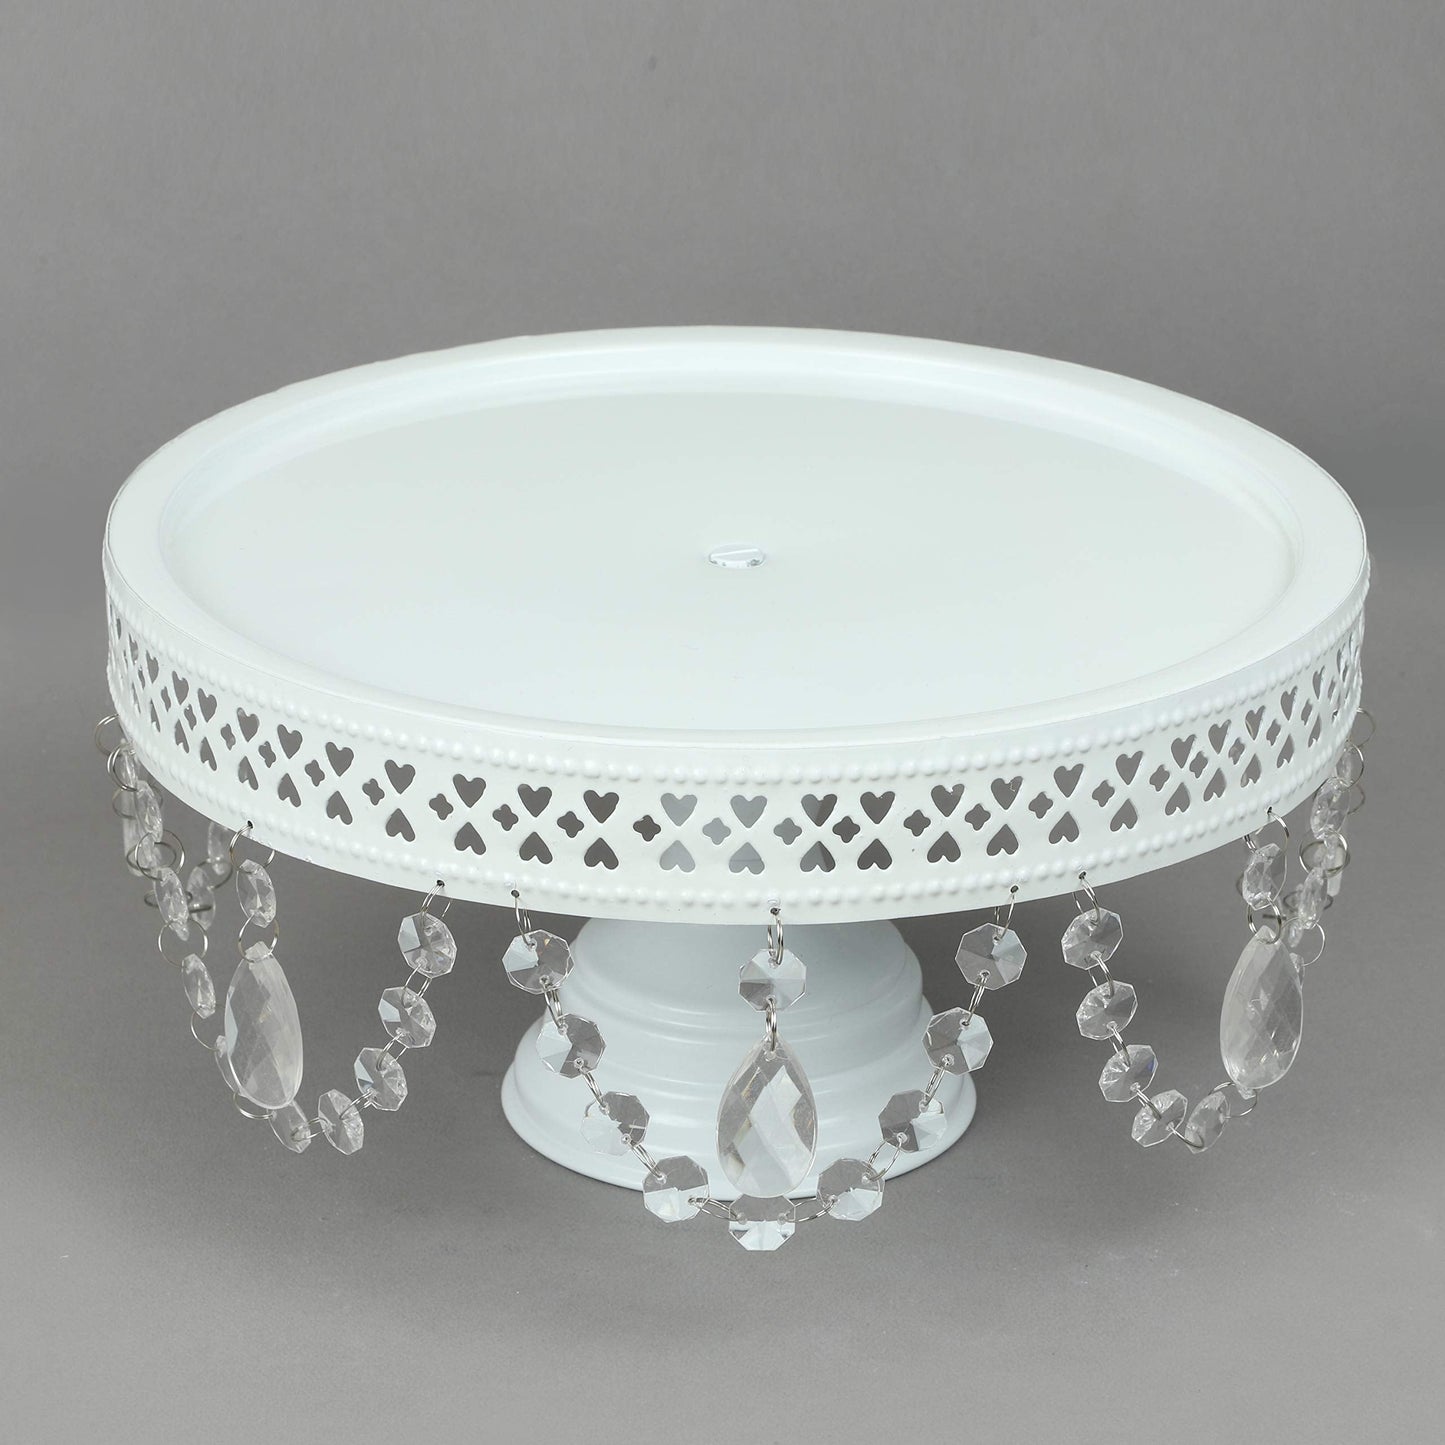 GiftBay Creations Cake Stand Pedestal 11" Diameter (Top), Strong Metal with Clear Hanging Crystals (White)